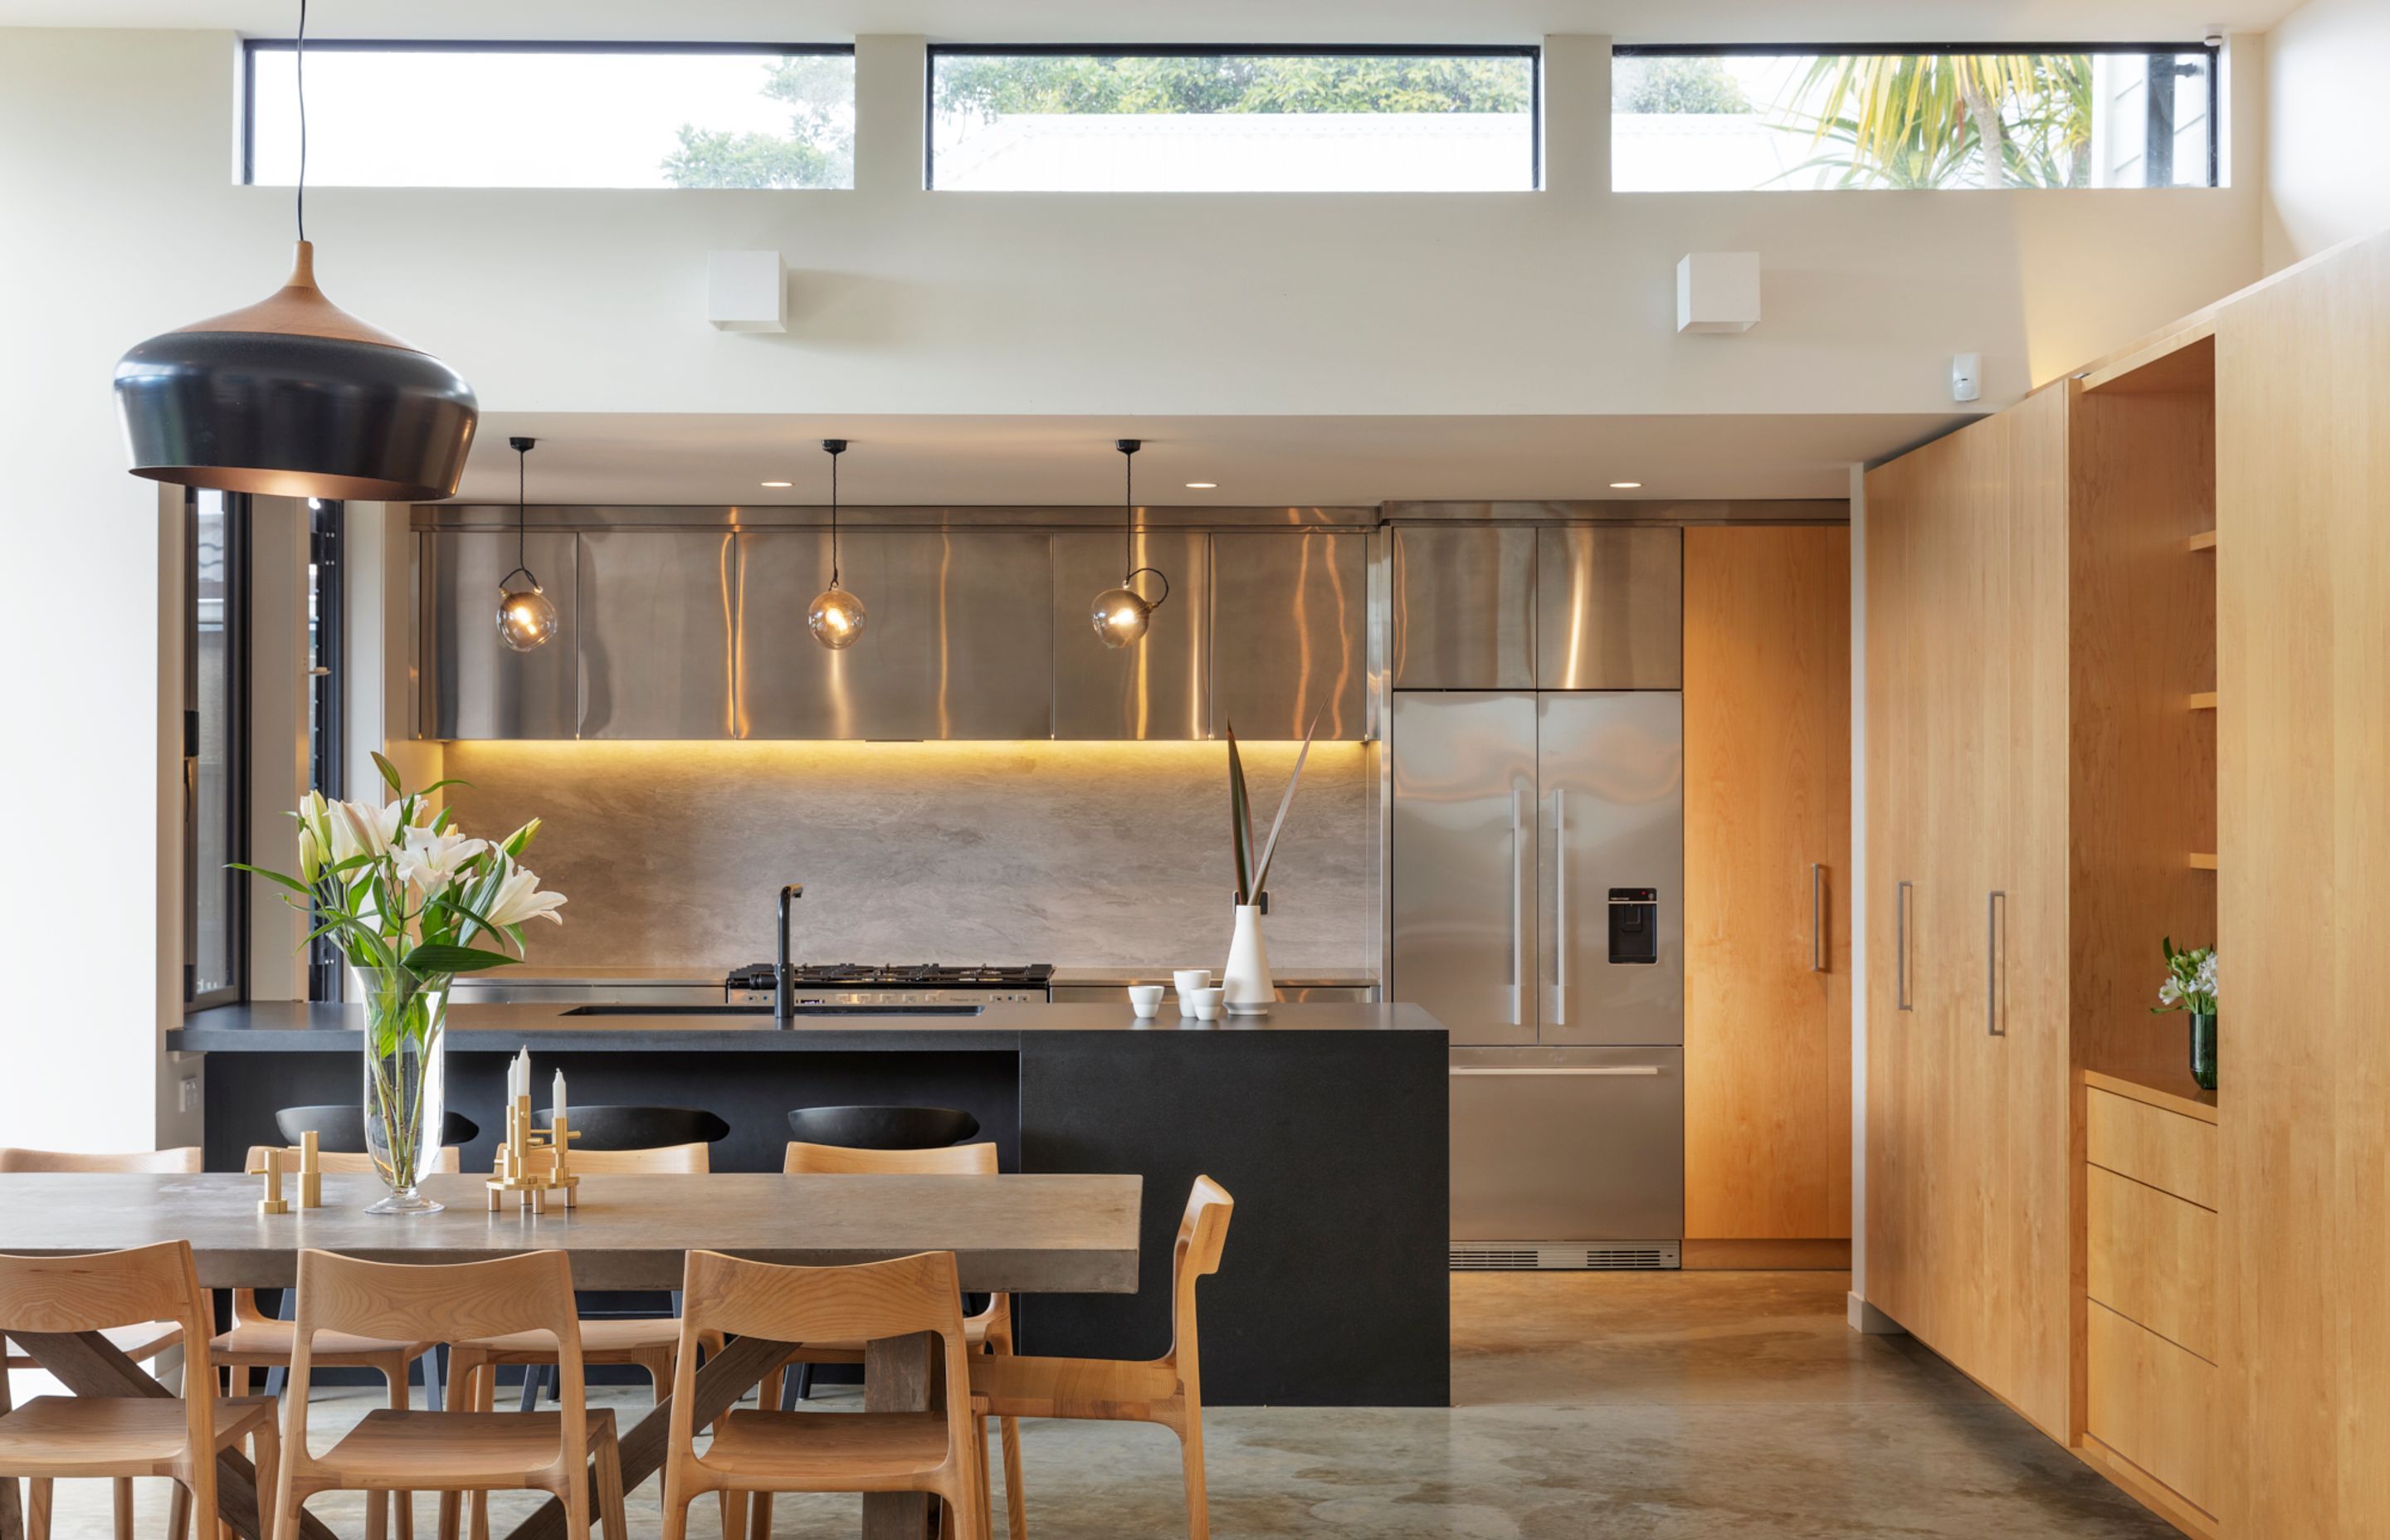 The kitchen ceiling is lower than the ceiling in the dining area, which features high clerestory windows that draws light into the space.